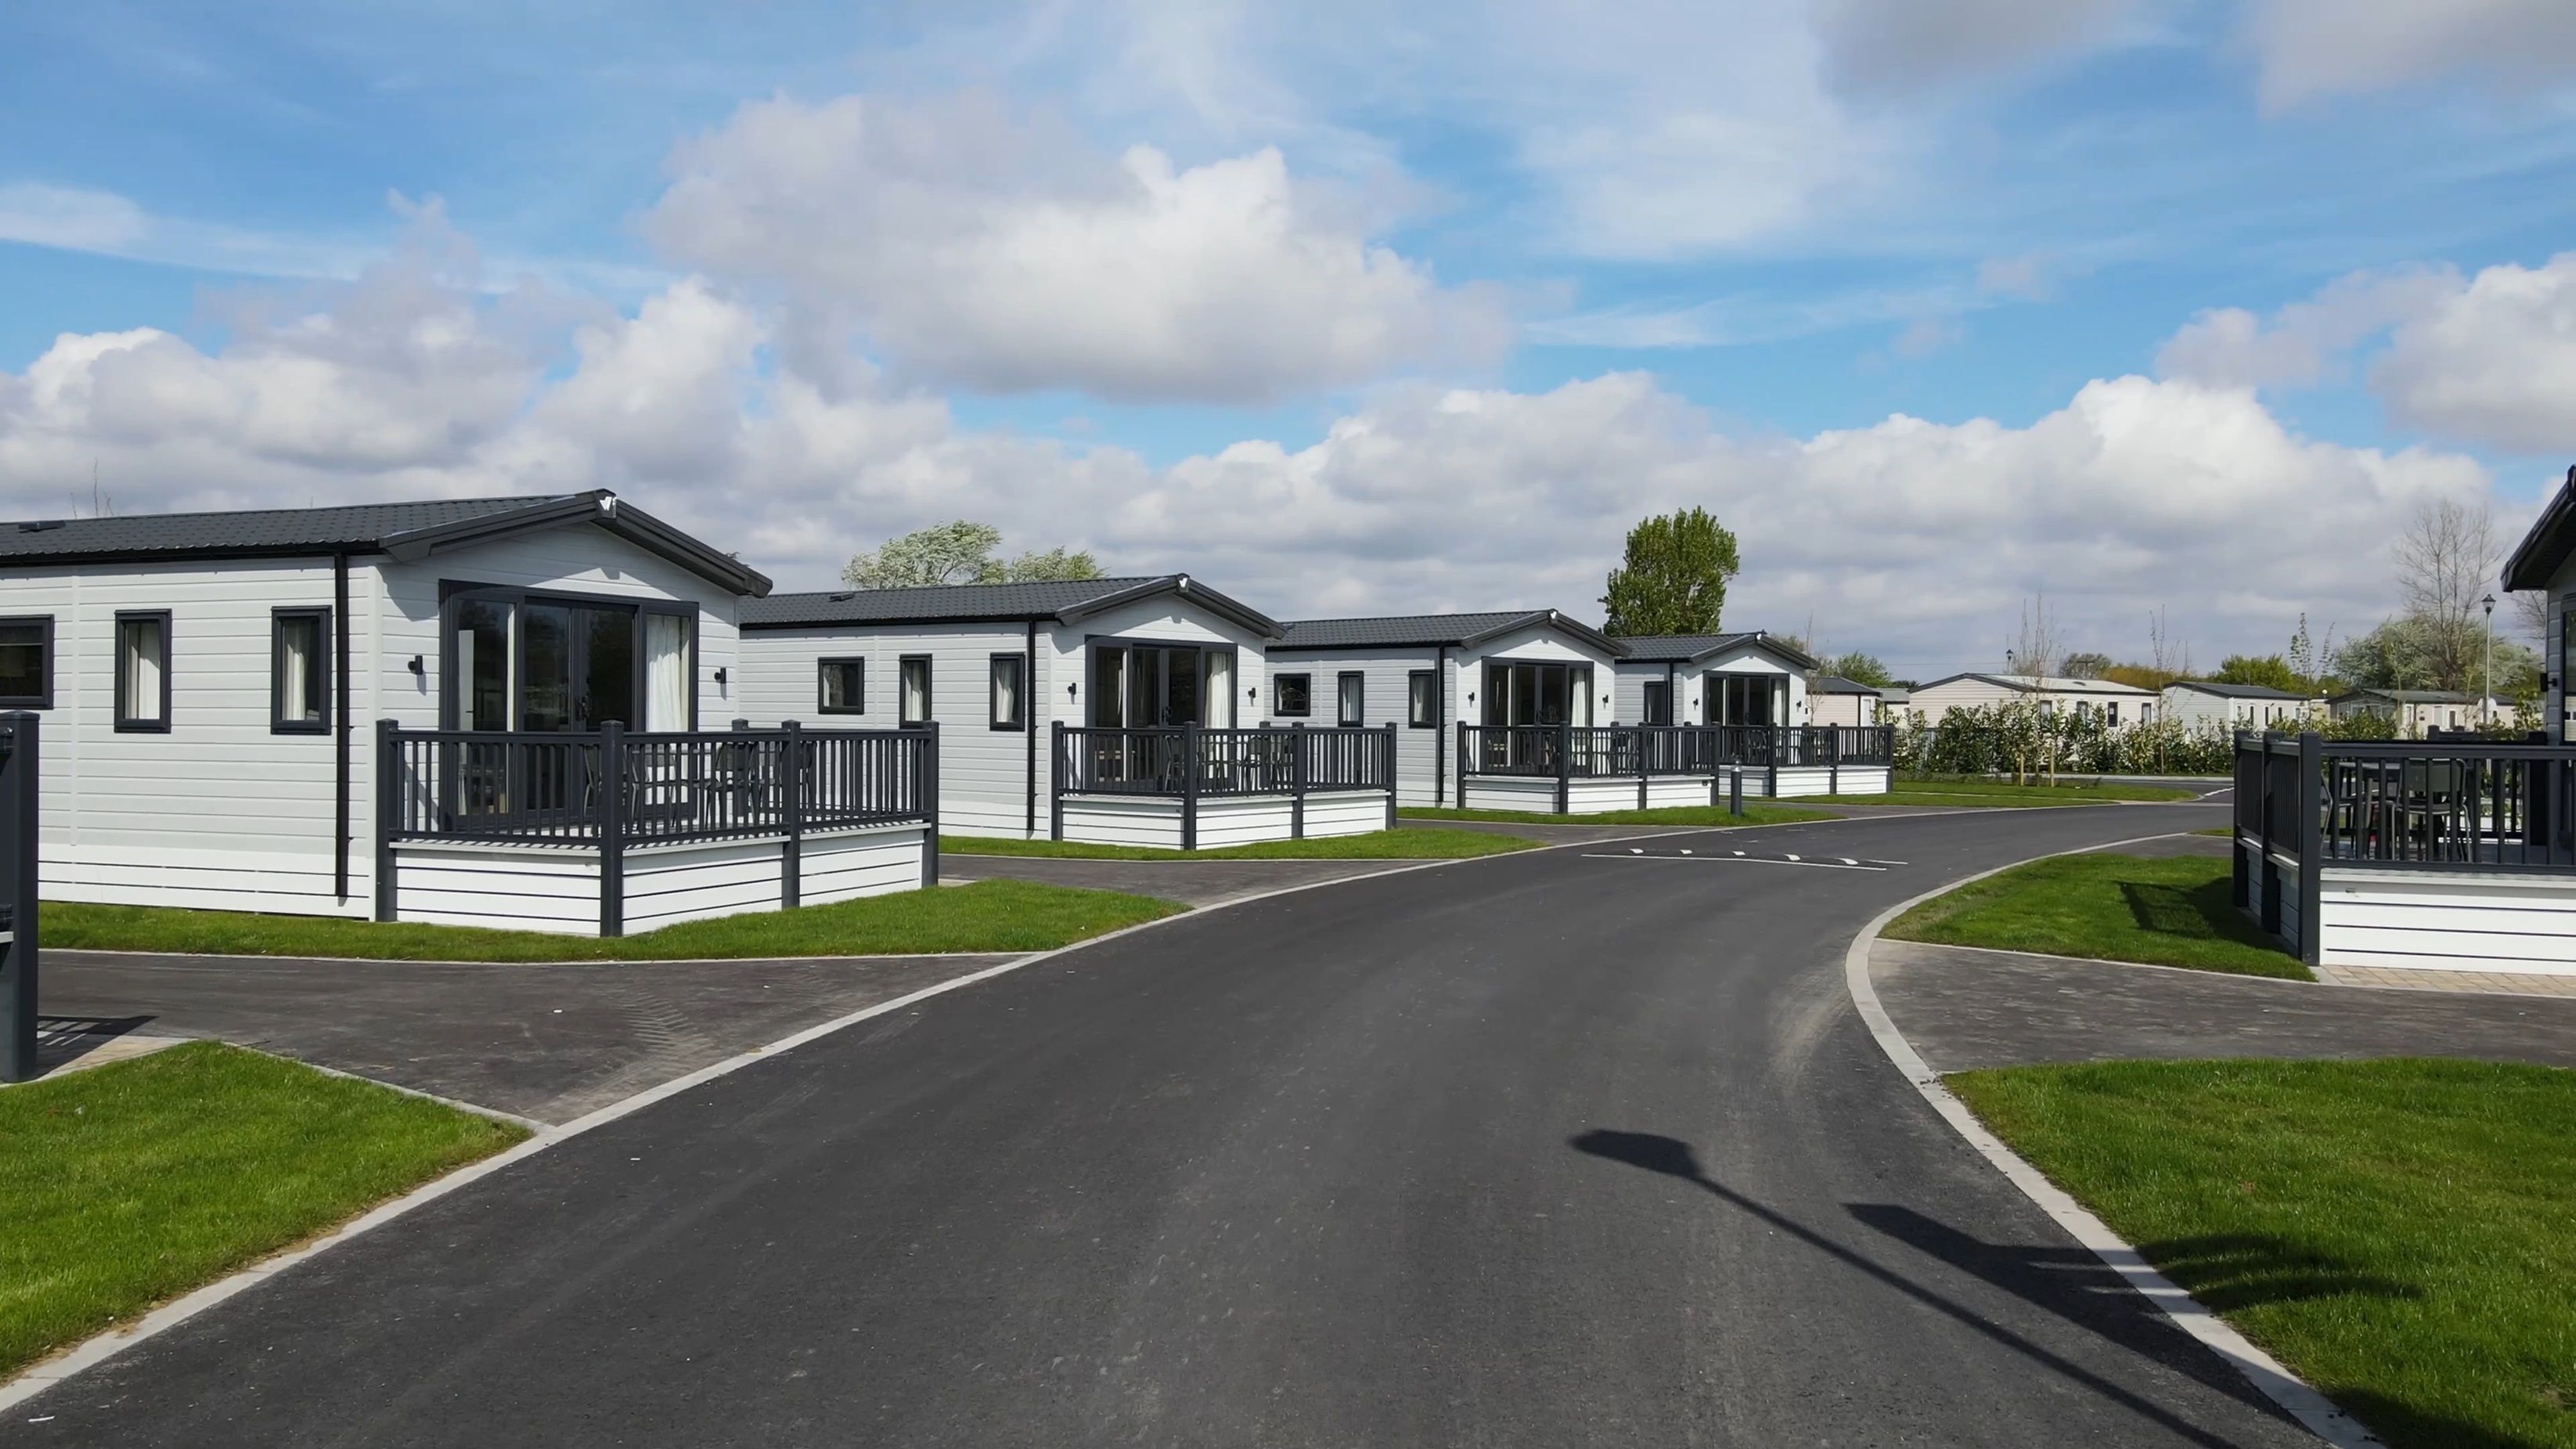 Willerby’s premium Gainsborough models form the entire accommodation offer in the newly opened Maple Walk site.